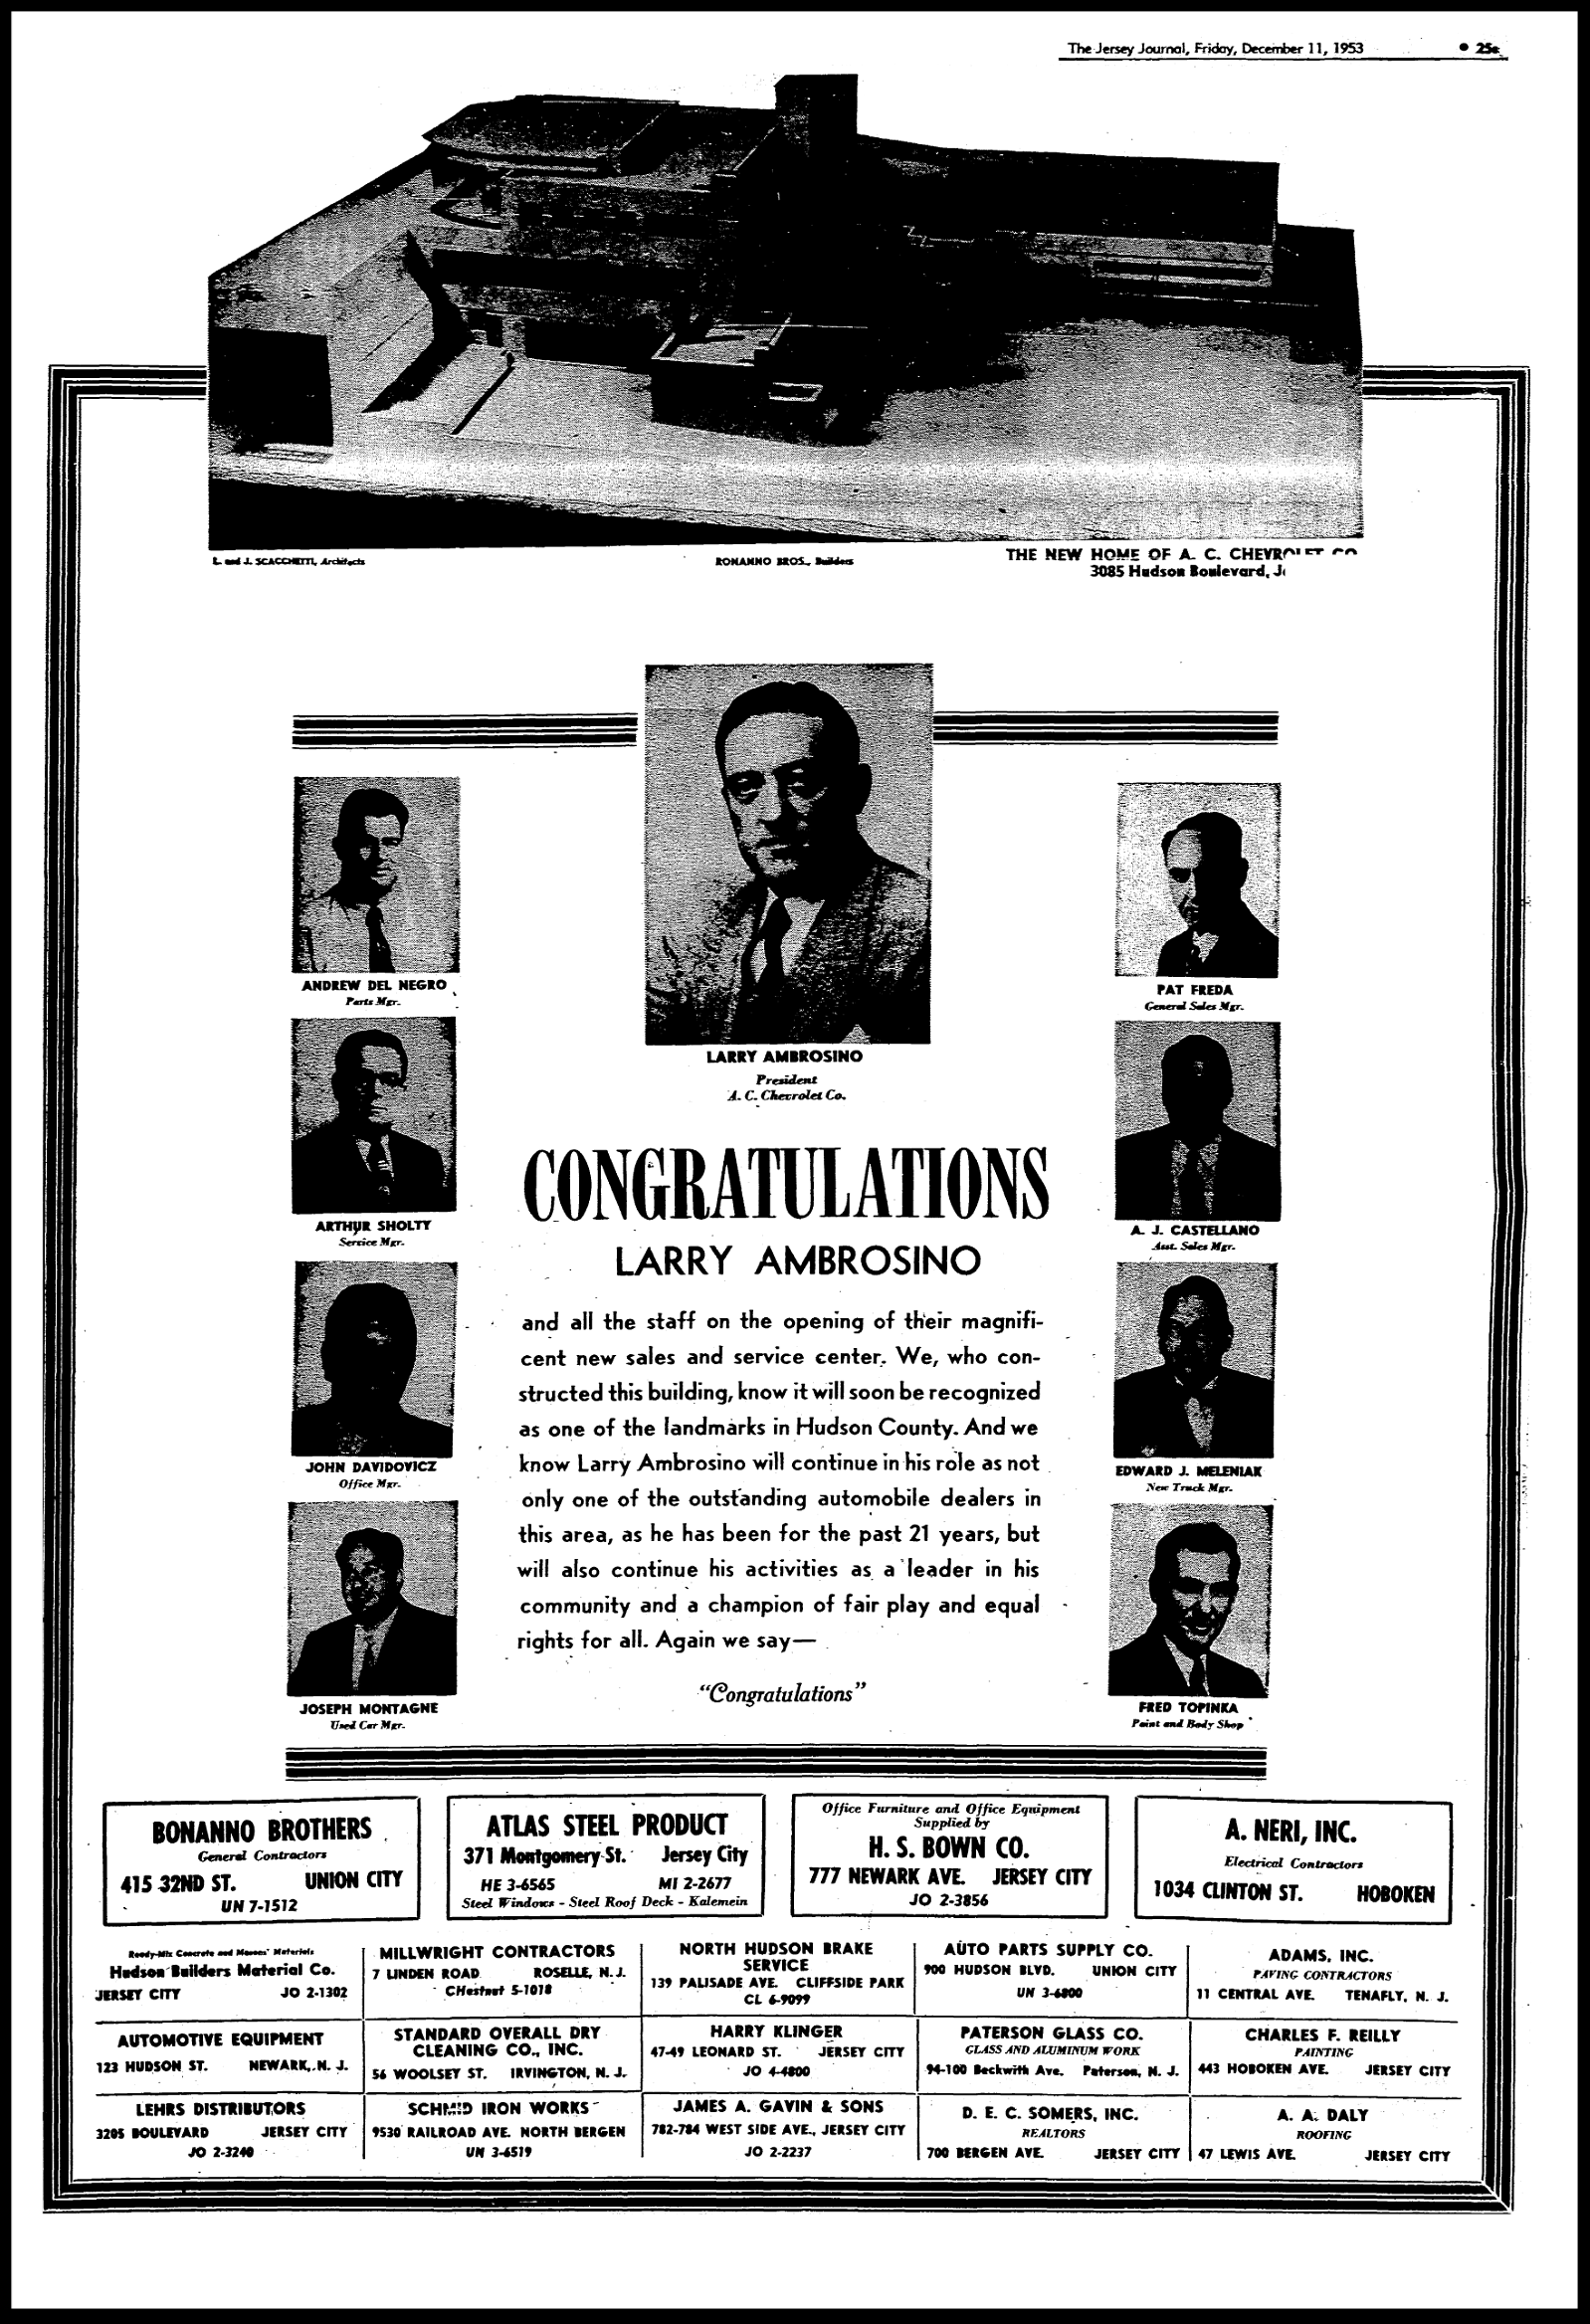 The Jersey Journal, Dec. 11, 1953: A full-page congratulatory advertisement features the names and faces of local builders and managers allied in the construction of a Chevy car model showroom and center that, upon its dedication, instantly set new design and operational standards. Lawrence Ambrosino (1904-1990), a pillar in Hudson County's Italian-American community, had achieved what few car dealers in the region ever could, and his peers in the industry heralded and found inspiration in his efforts. -- John Gomez